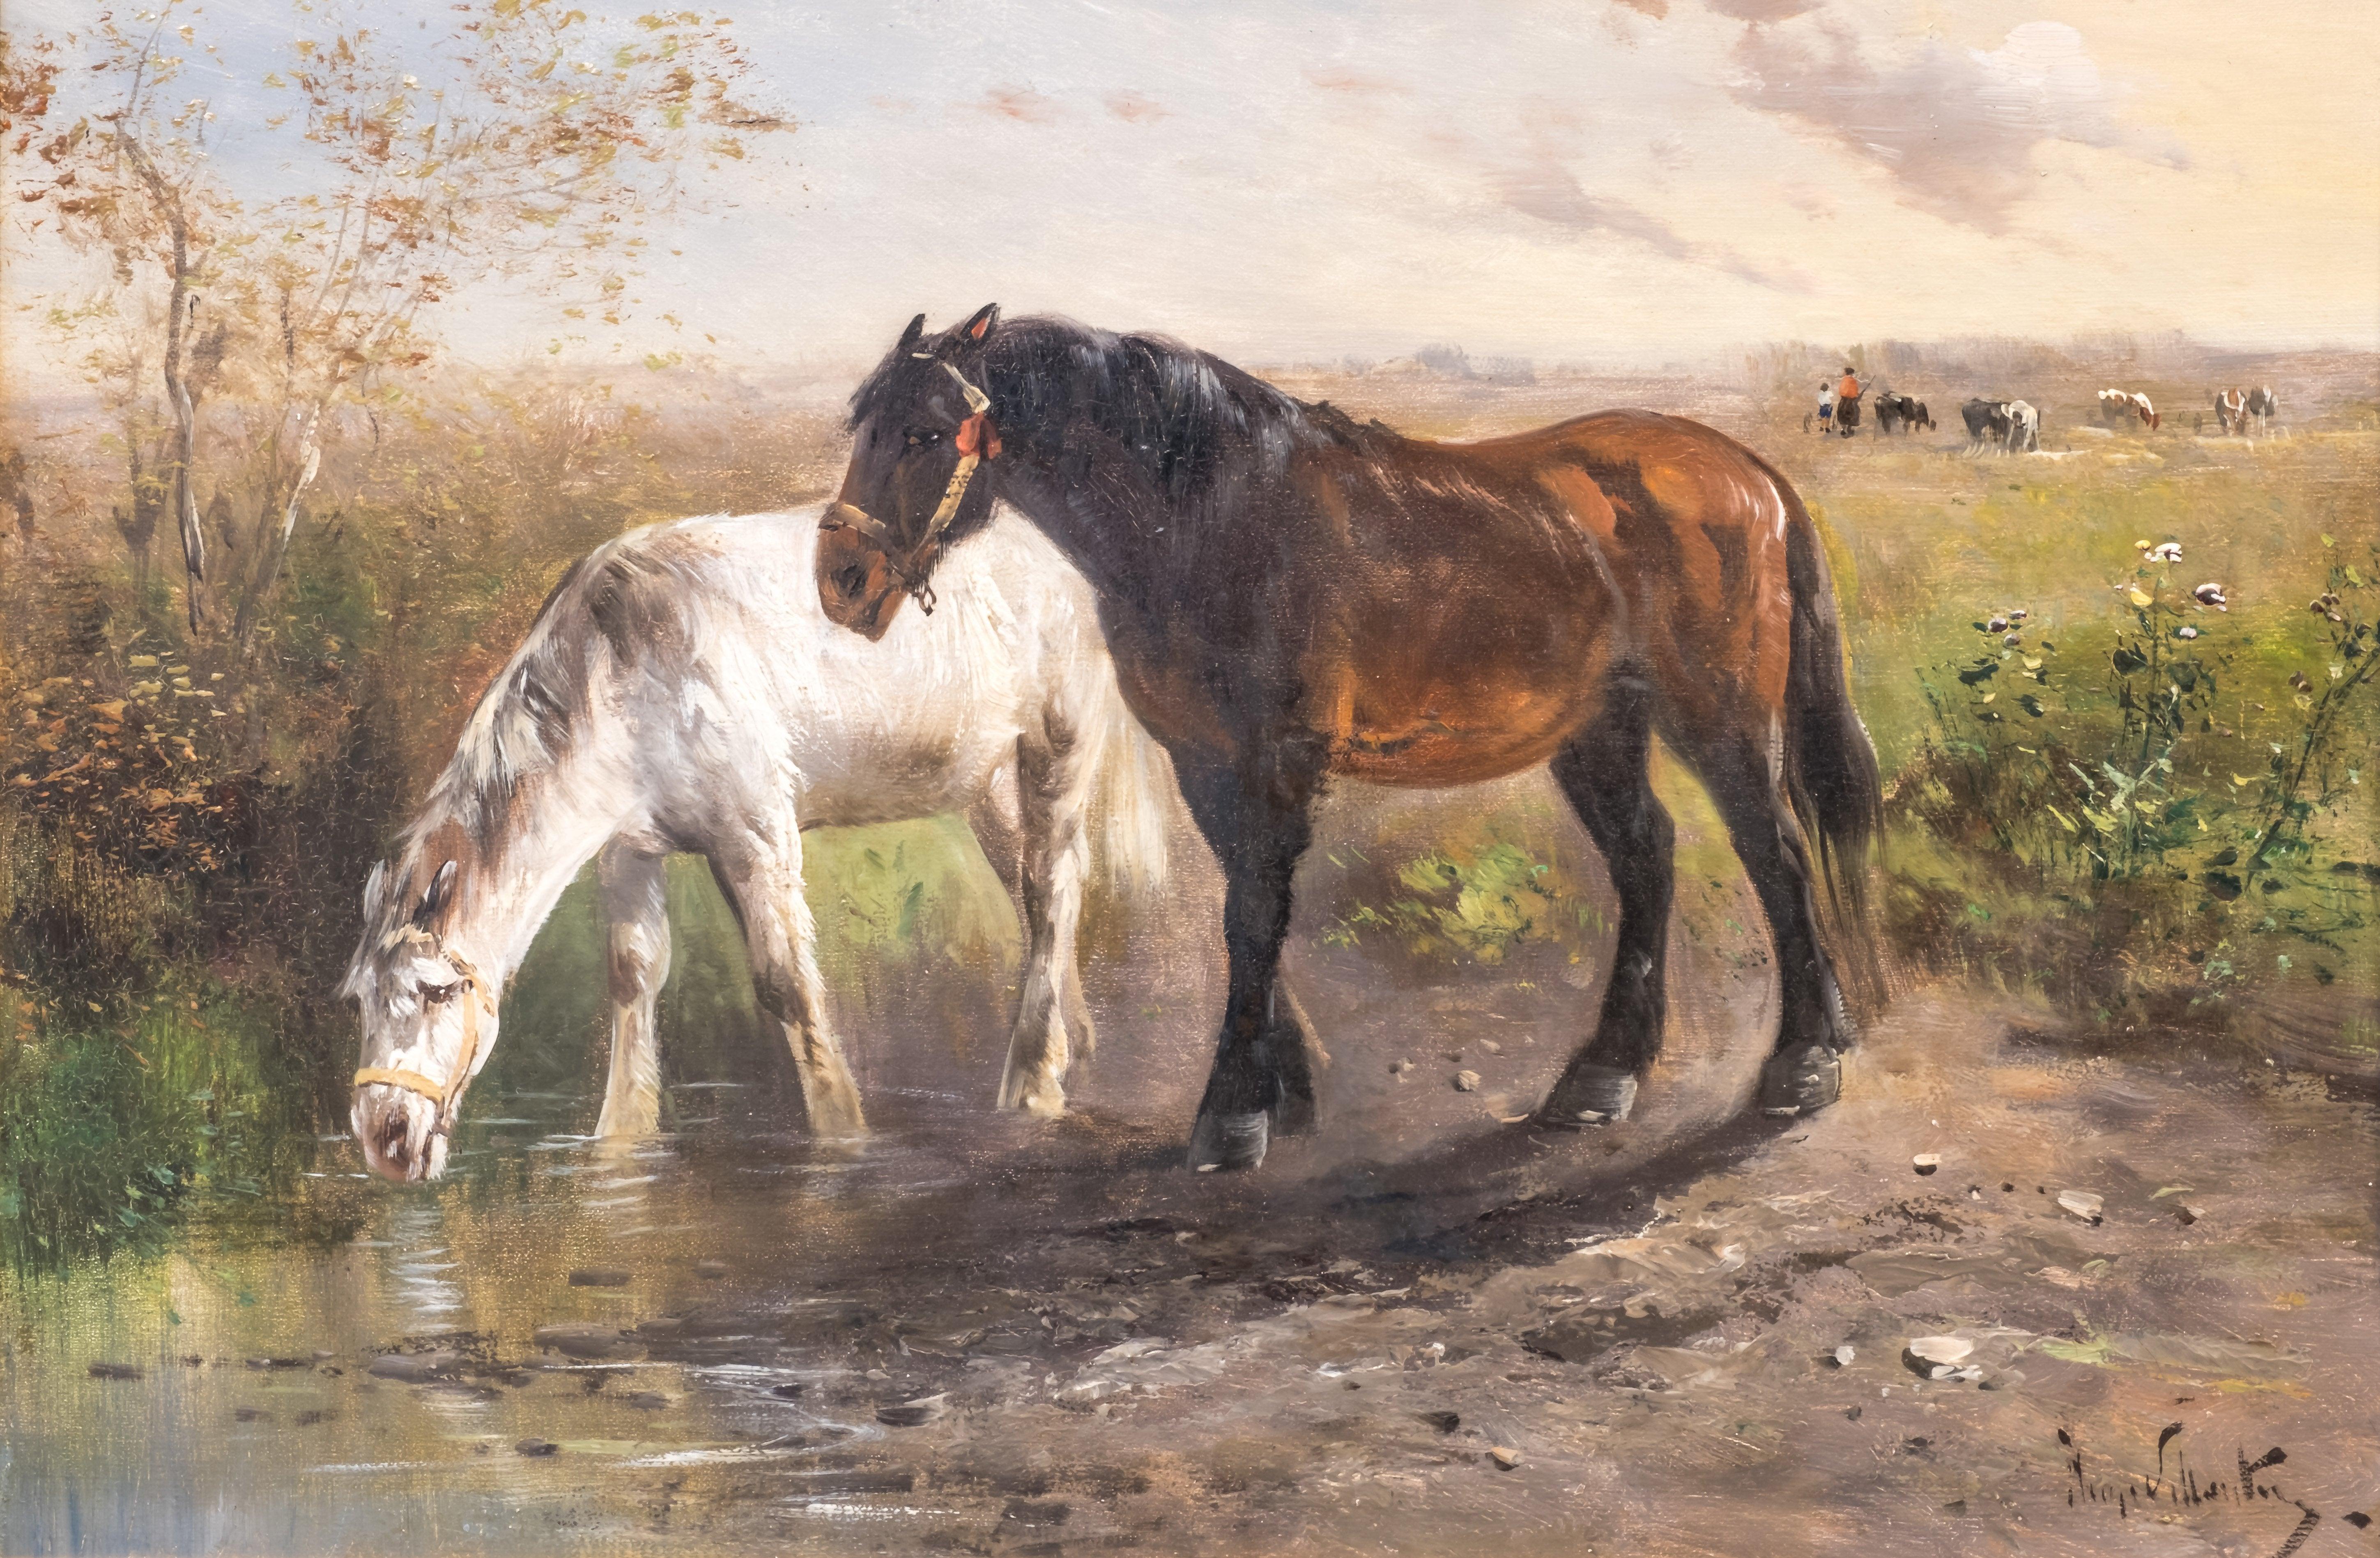 A late 19th century oil painting by Belgian artist Henry Schouten (1864-1927). The scene depicts two work horses in the wilderness. One of the horses is drinking water from a paddle in the foreground. 
In the background civilization is evident: A